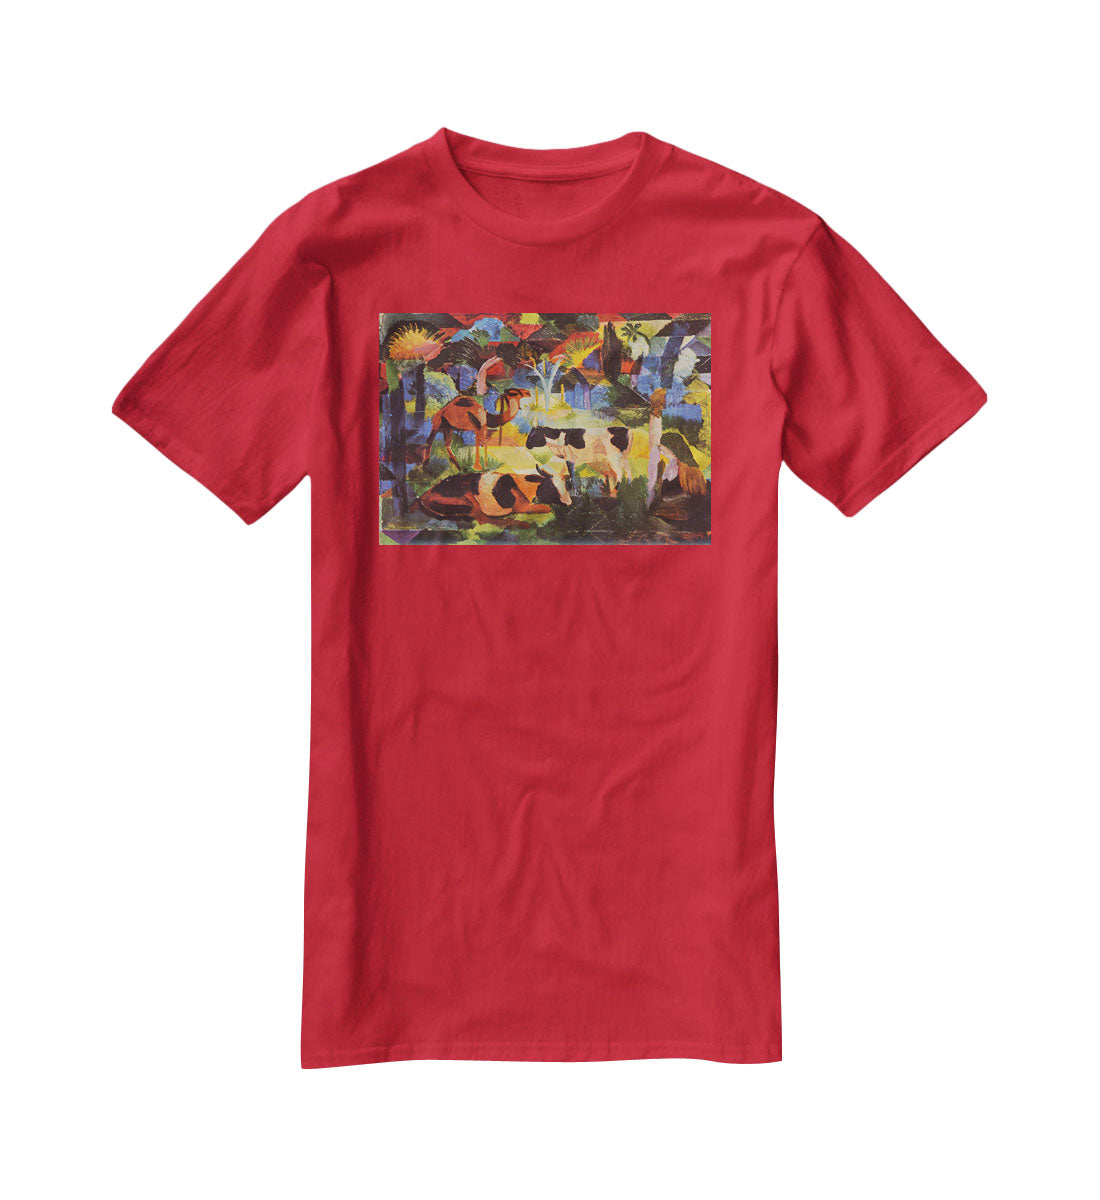 Landscape with cows and camels by Macke T-Shirt - Canvas Art Rocks - 4